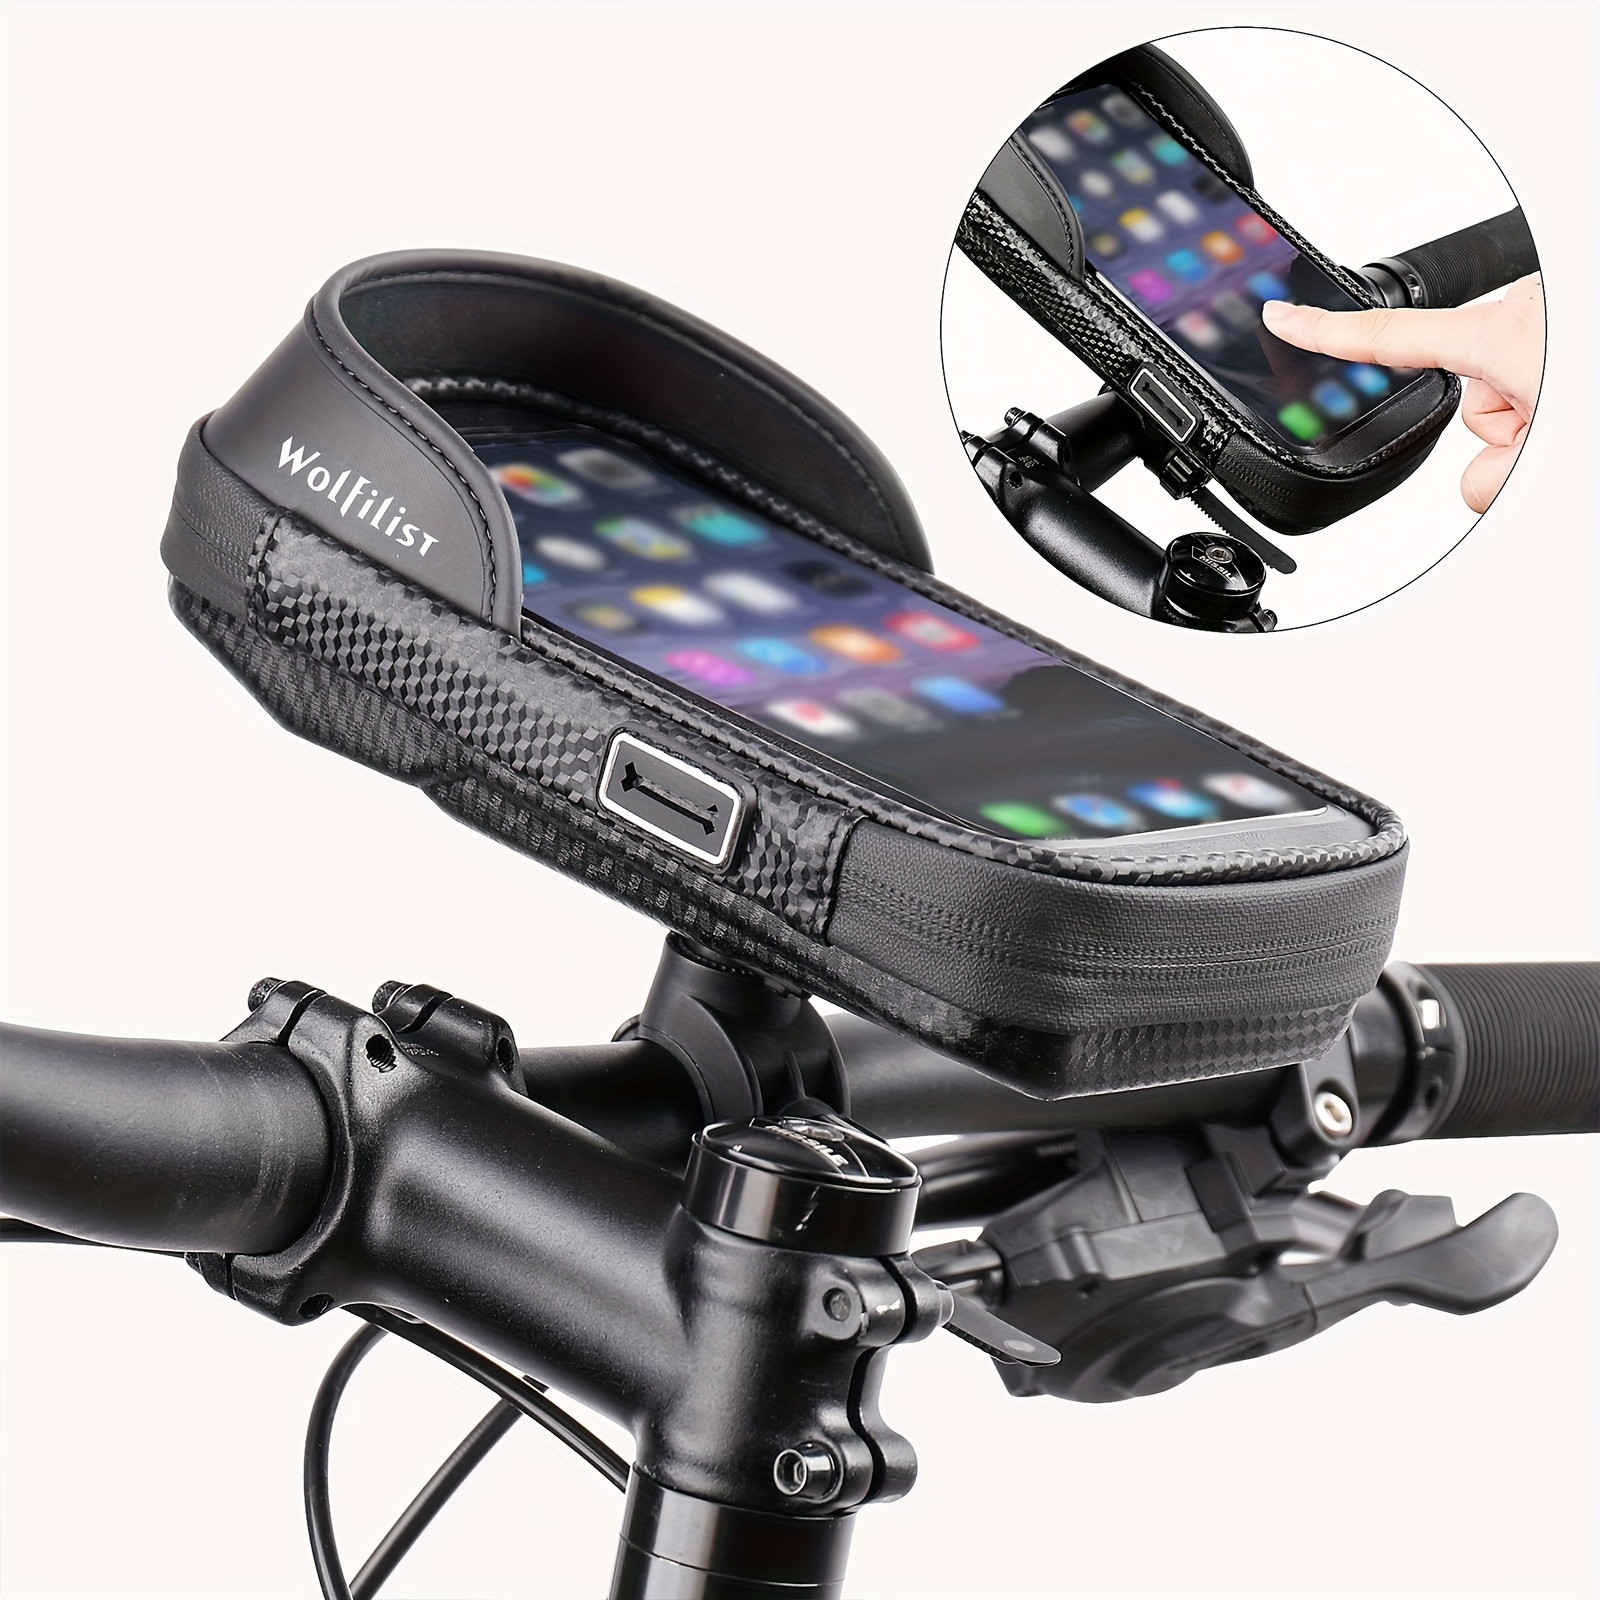 

Multi-directional Adjustable Bike Bag Handlebar - Waterproof Cycling Front Top Tube With Sunshade, Touch Screen Phone Hanging Pocket & Mount Holder Stand For Iphone 12/11 Pro Max/xs Max/xr/x/8/7/6/6s